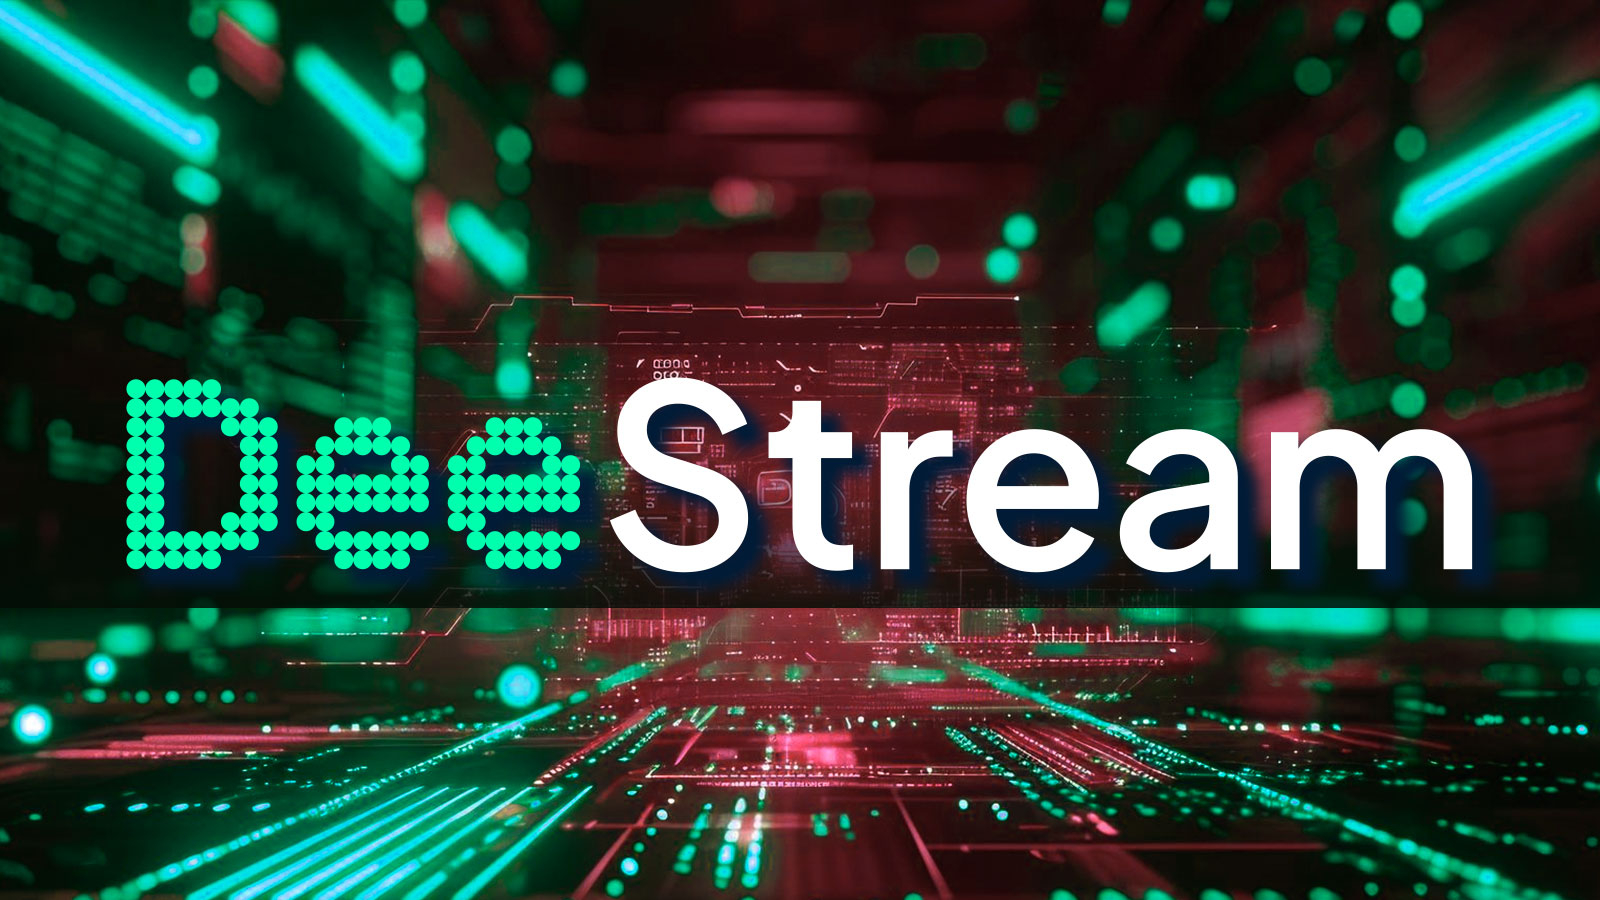 DeeStream (DST) Cryptocurrency Asset Sale New Stage Might be Spotlighted in April as Ethereum (ETH), Solana (SOL) Communities Remain Optimistic